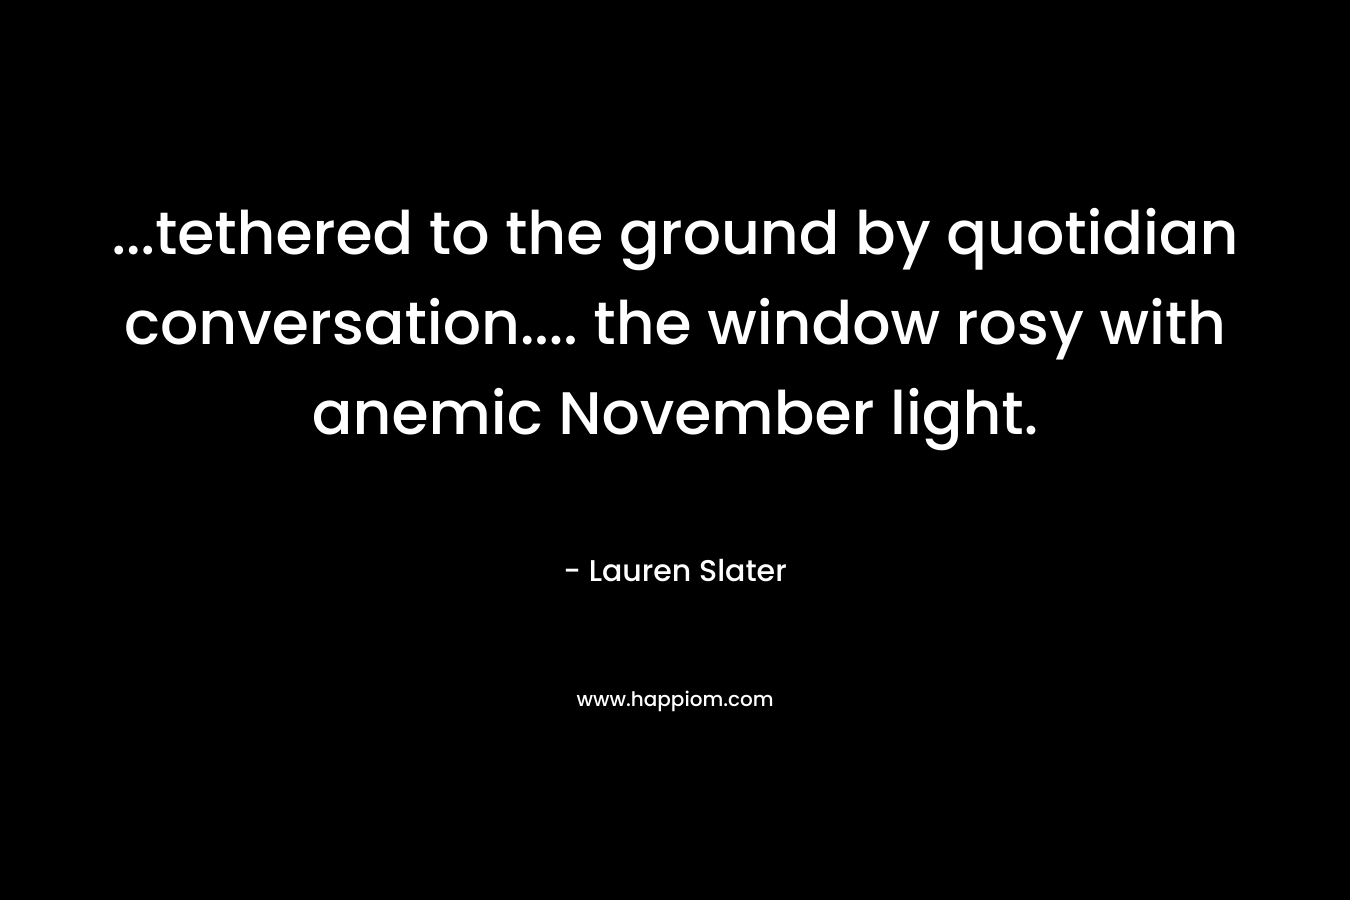 …tethered to the ground by quotidian conversation…. the window rosy with anemic November light. – Lauren Slater